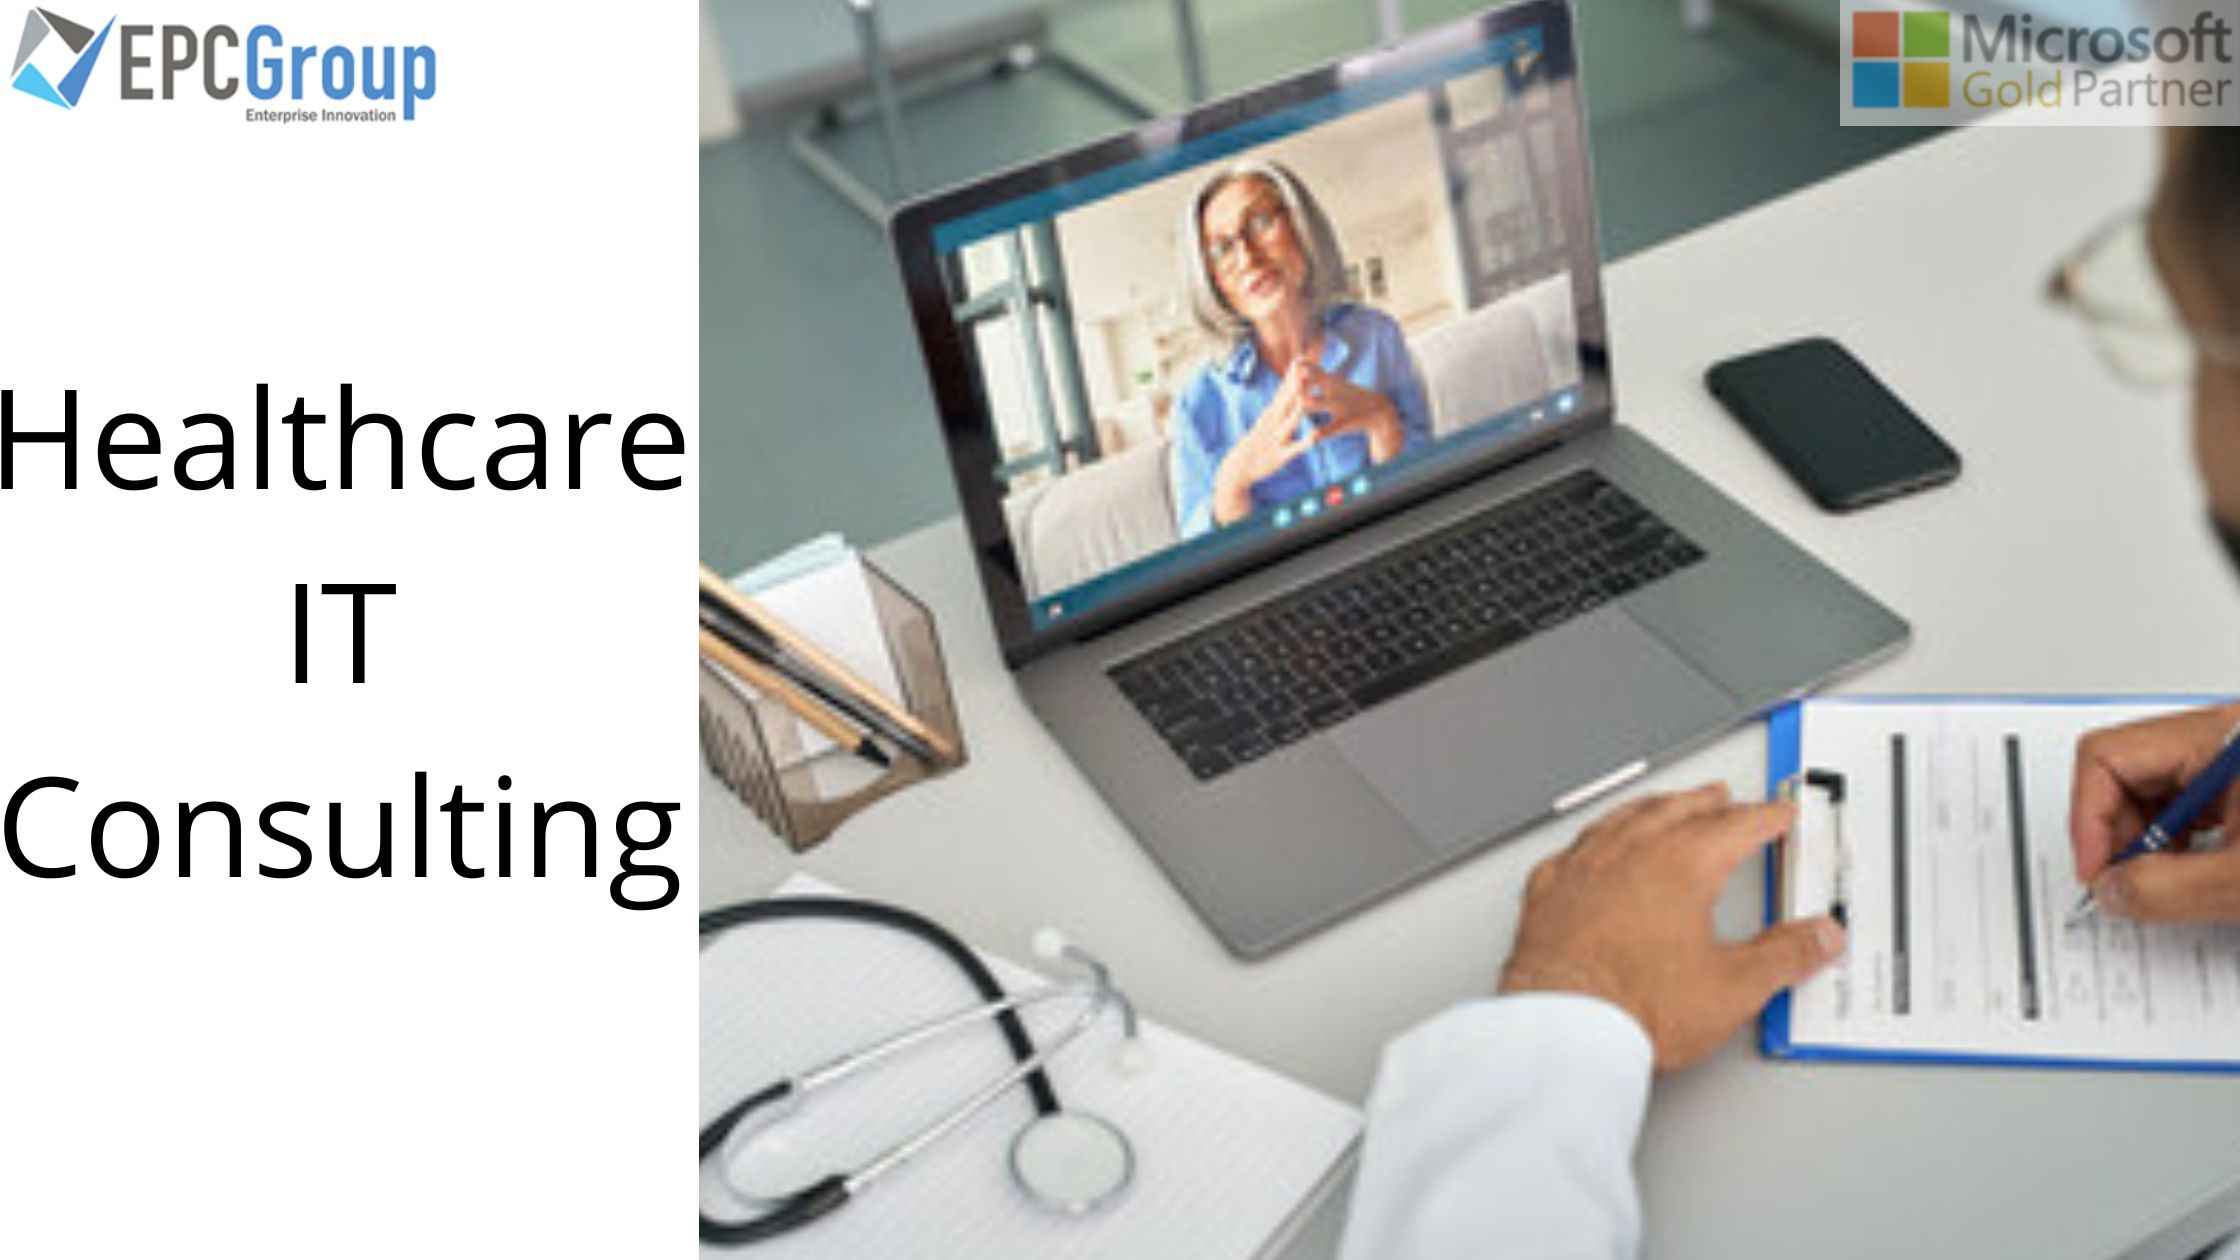 Healthcare IT Consulting for Hospitals and Healthcare Providers: Reducing Costs, Improving Patient Care - thumb image